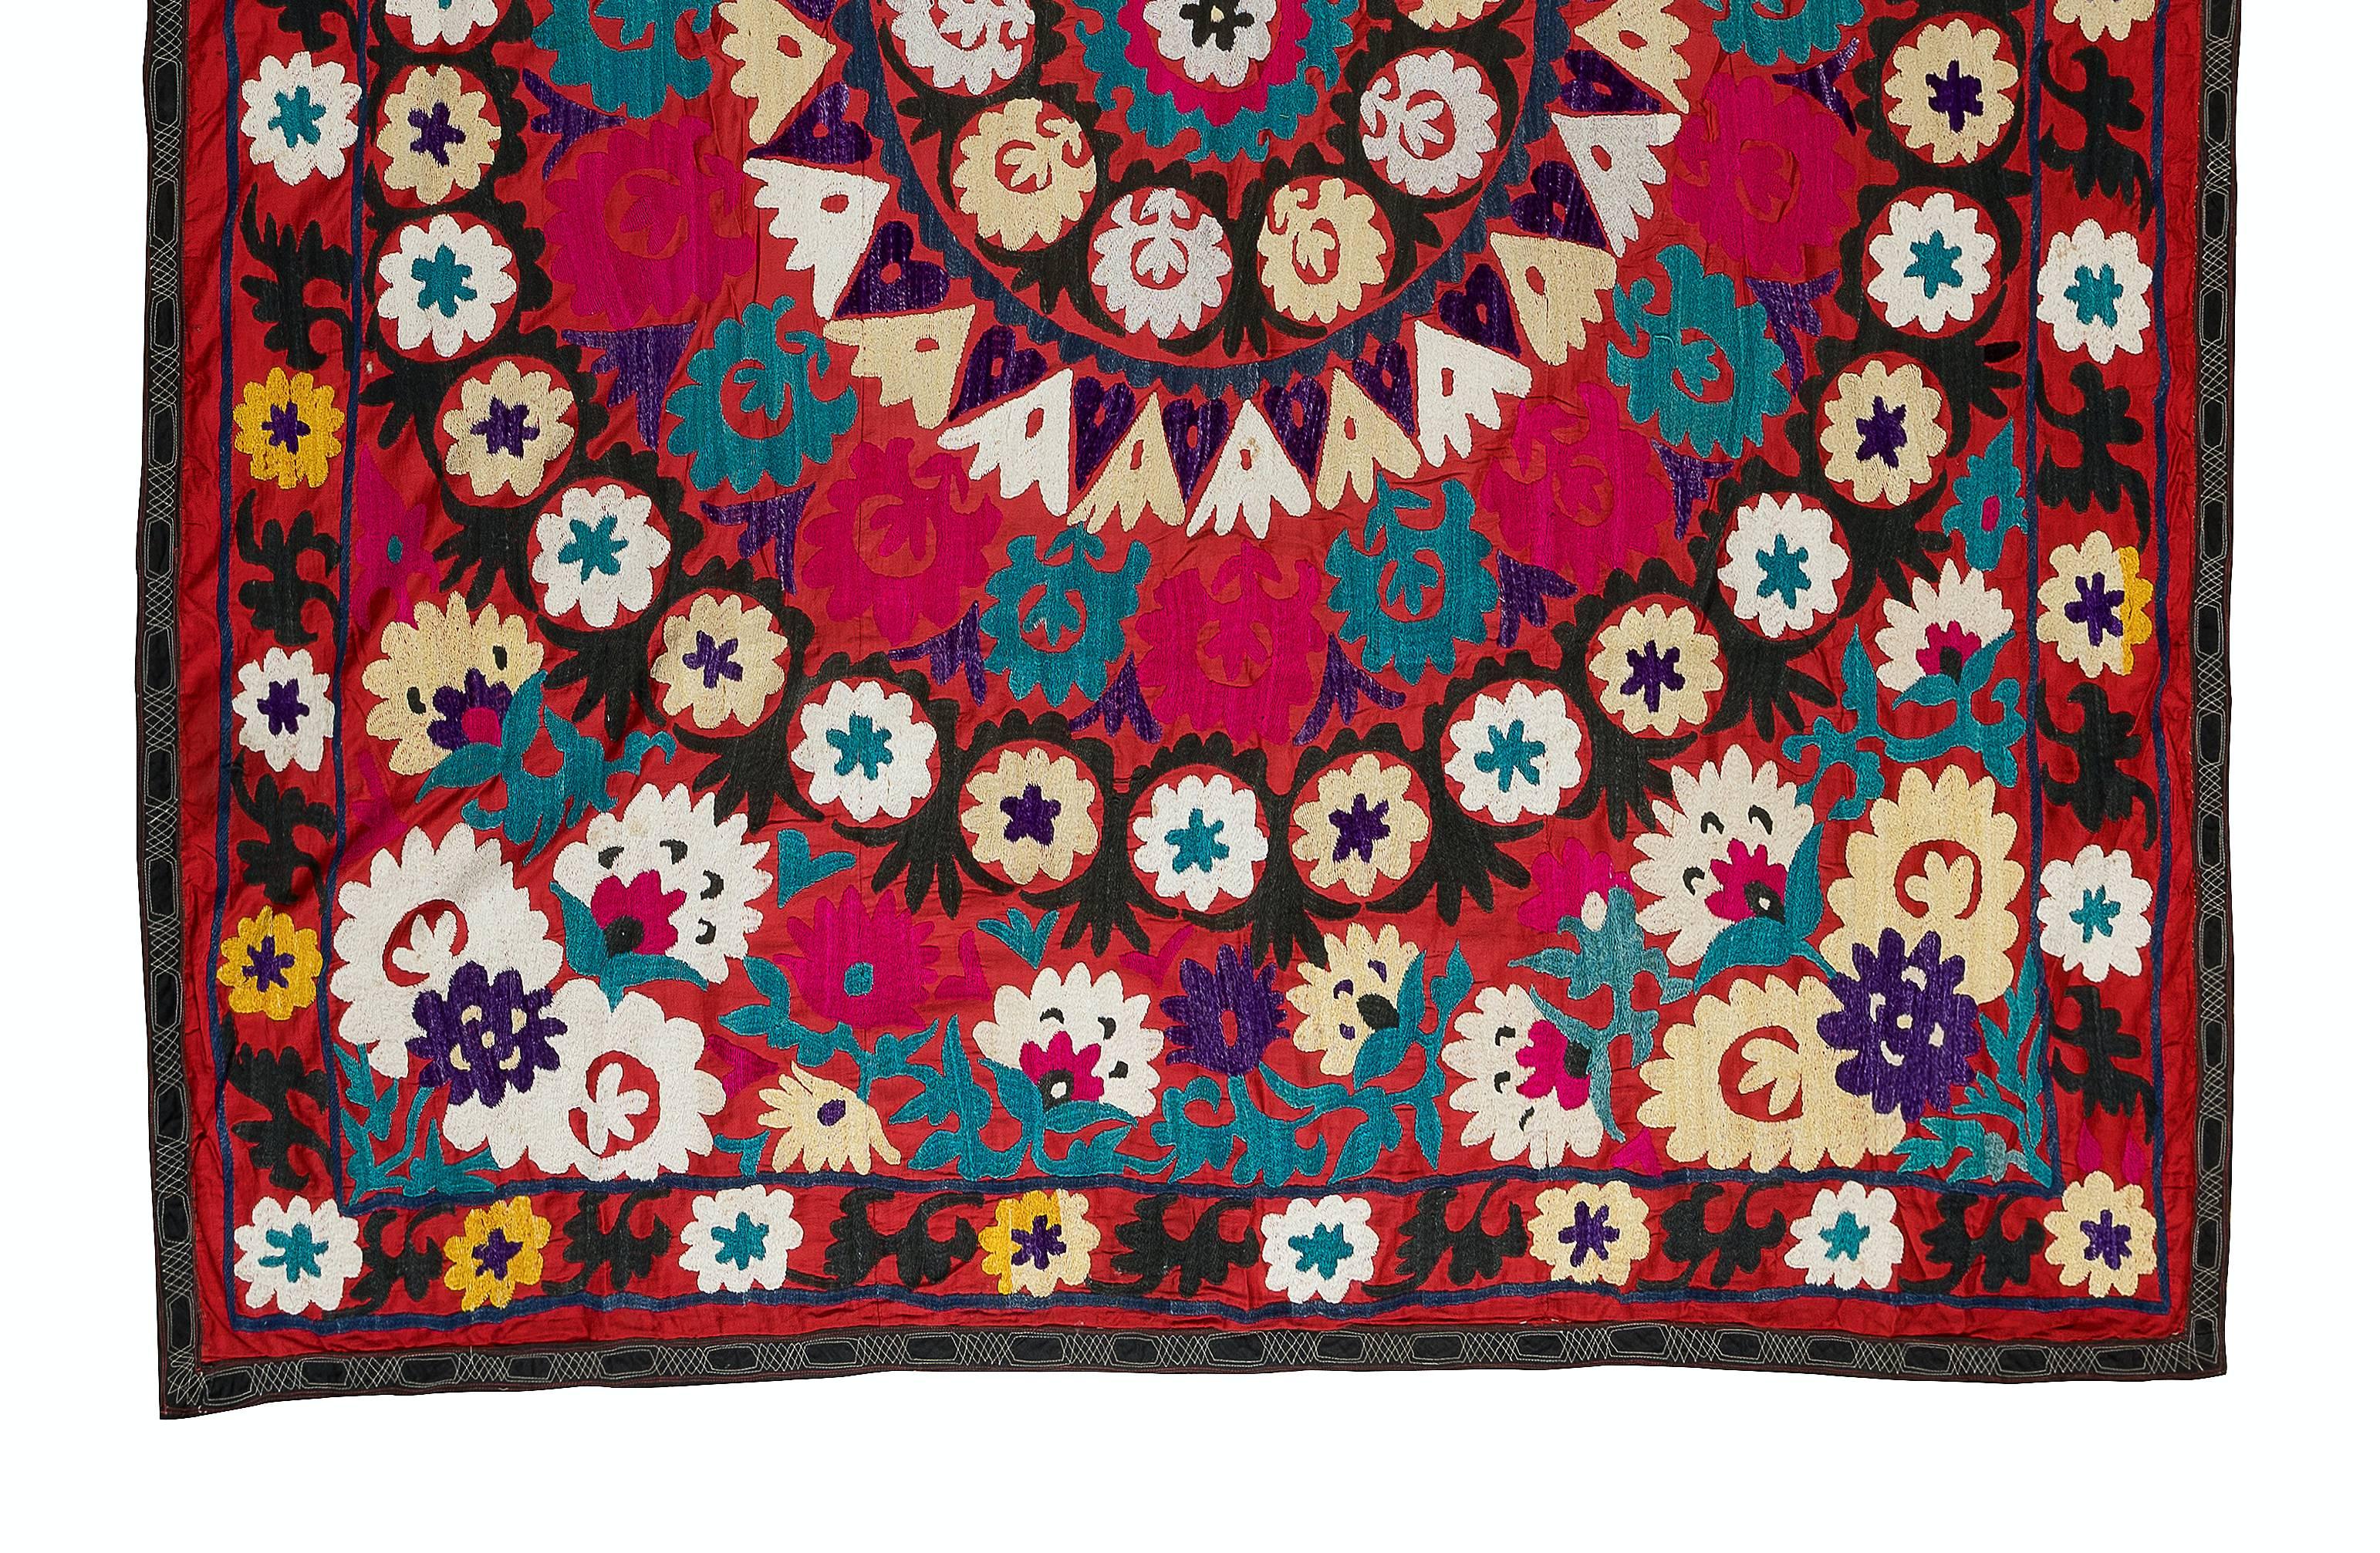 Uzbek 6x7 Ft Vintage Silk Embroidery Bed Cover, Suzani Wall Hanging, Red Tablecloth For Sale